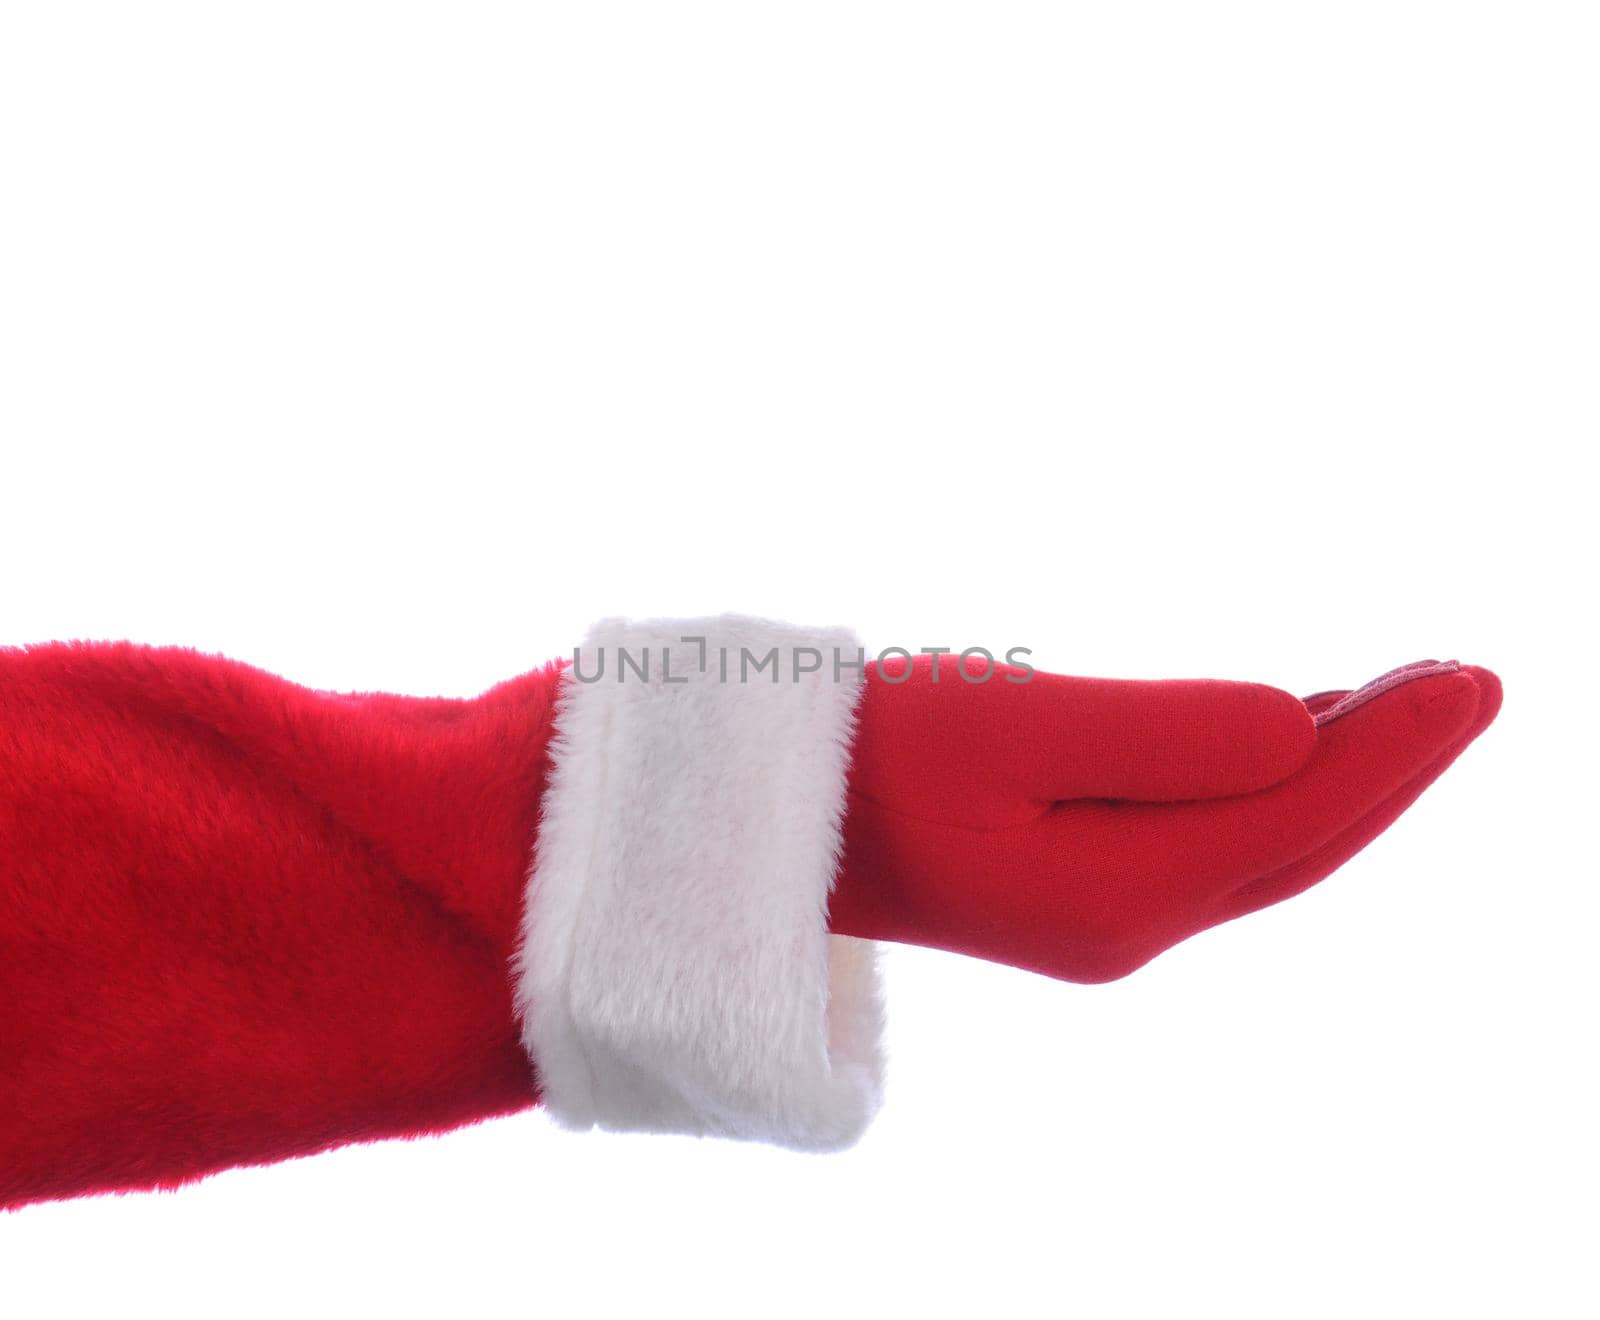 Santa Claus outstretched arm with his palm facing upwards. Horizontal format over a white background.